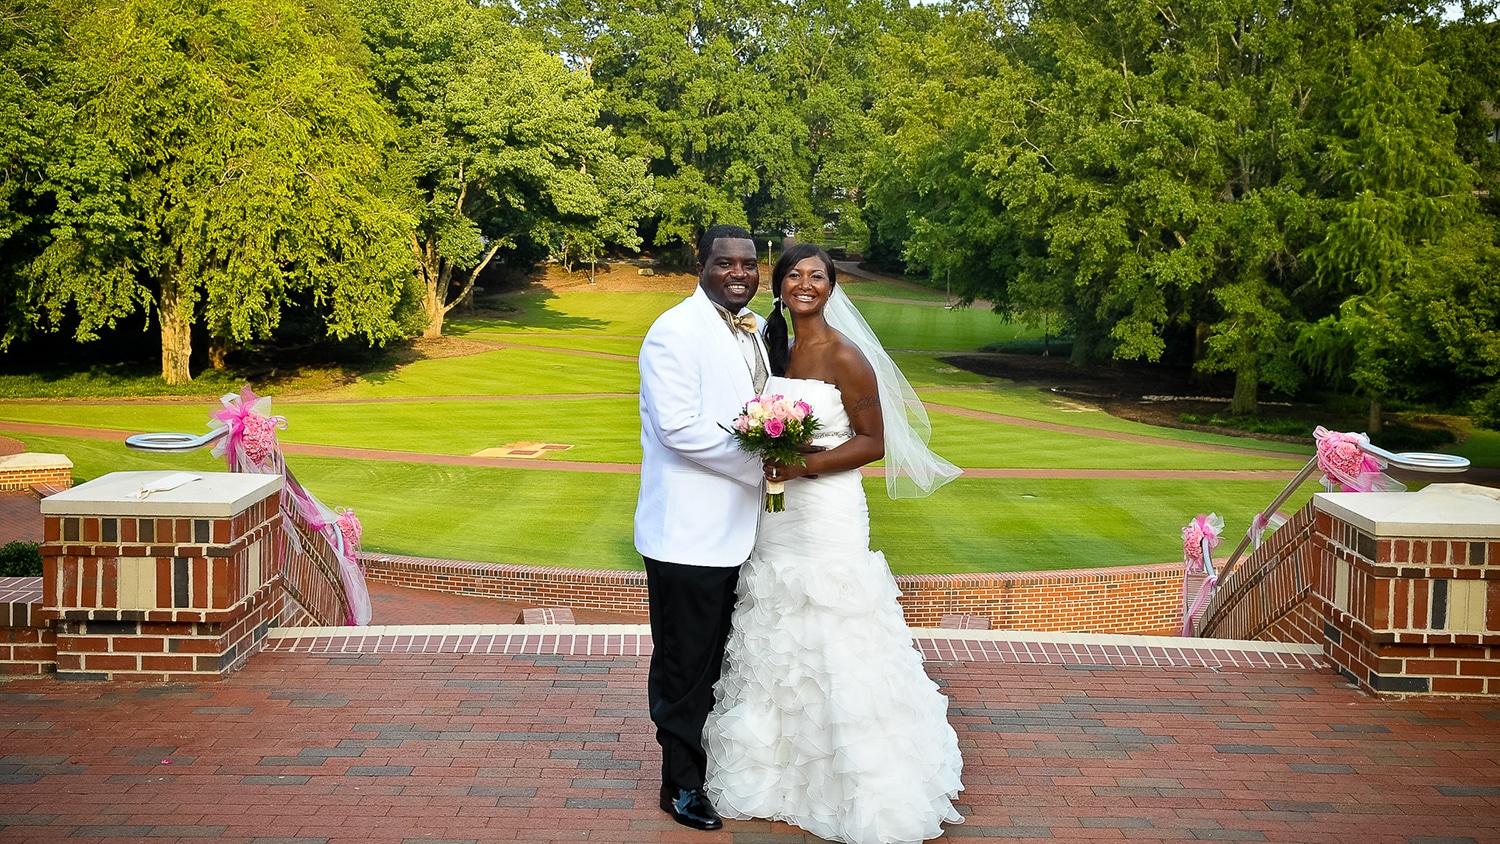 McKinlay and LaTeisha Jeannis stand for a portrait overlooking the Court of North Carolina wearing their wedding attire.